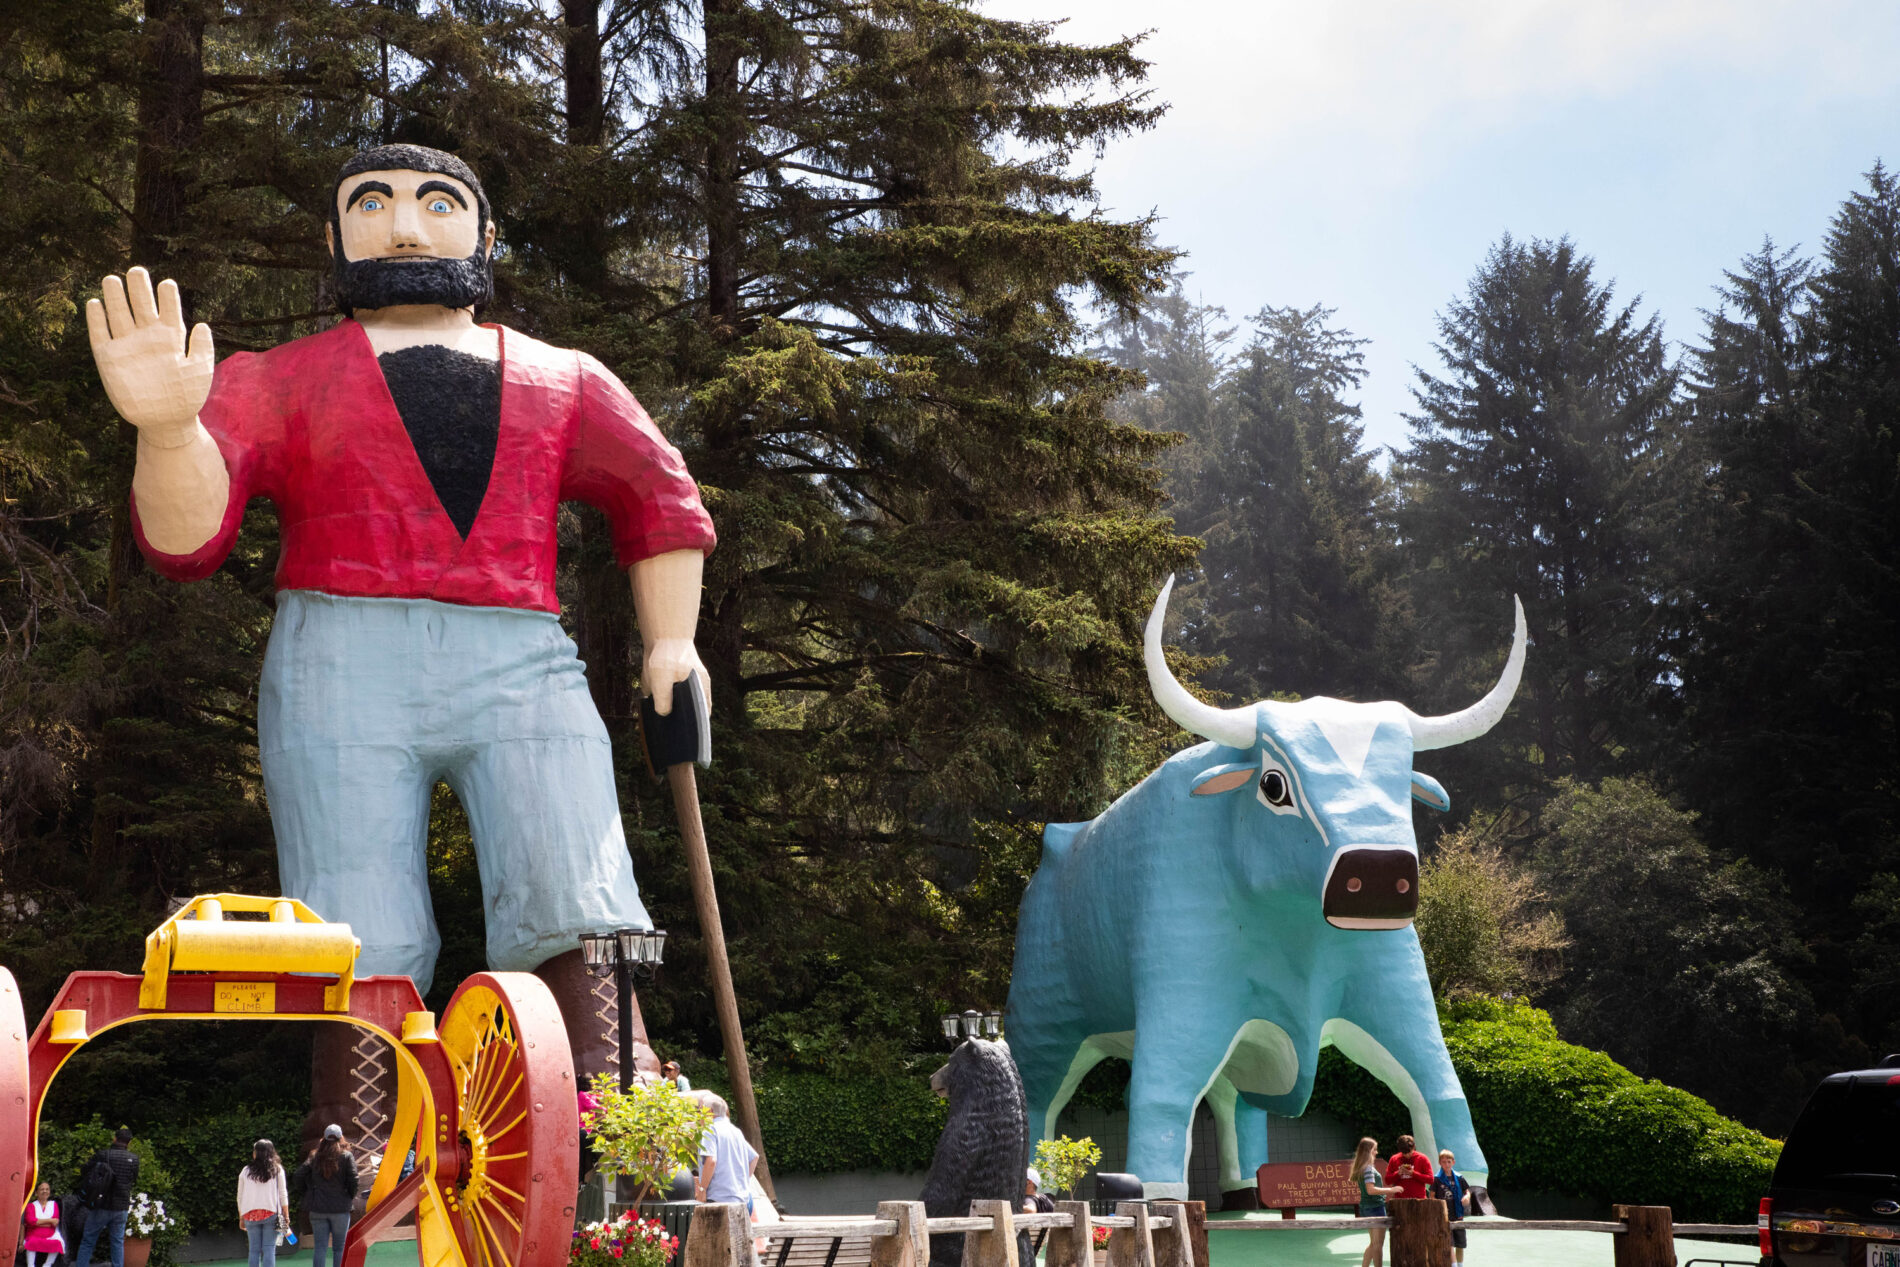 Every Pacific Coast Highway trip should include a stop to say hello to Paul Bunyon and he blue ox.